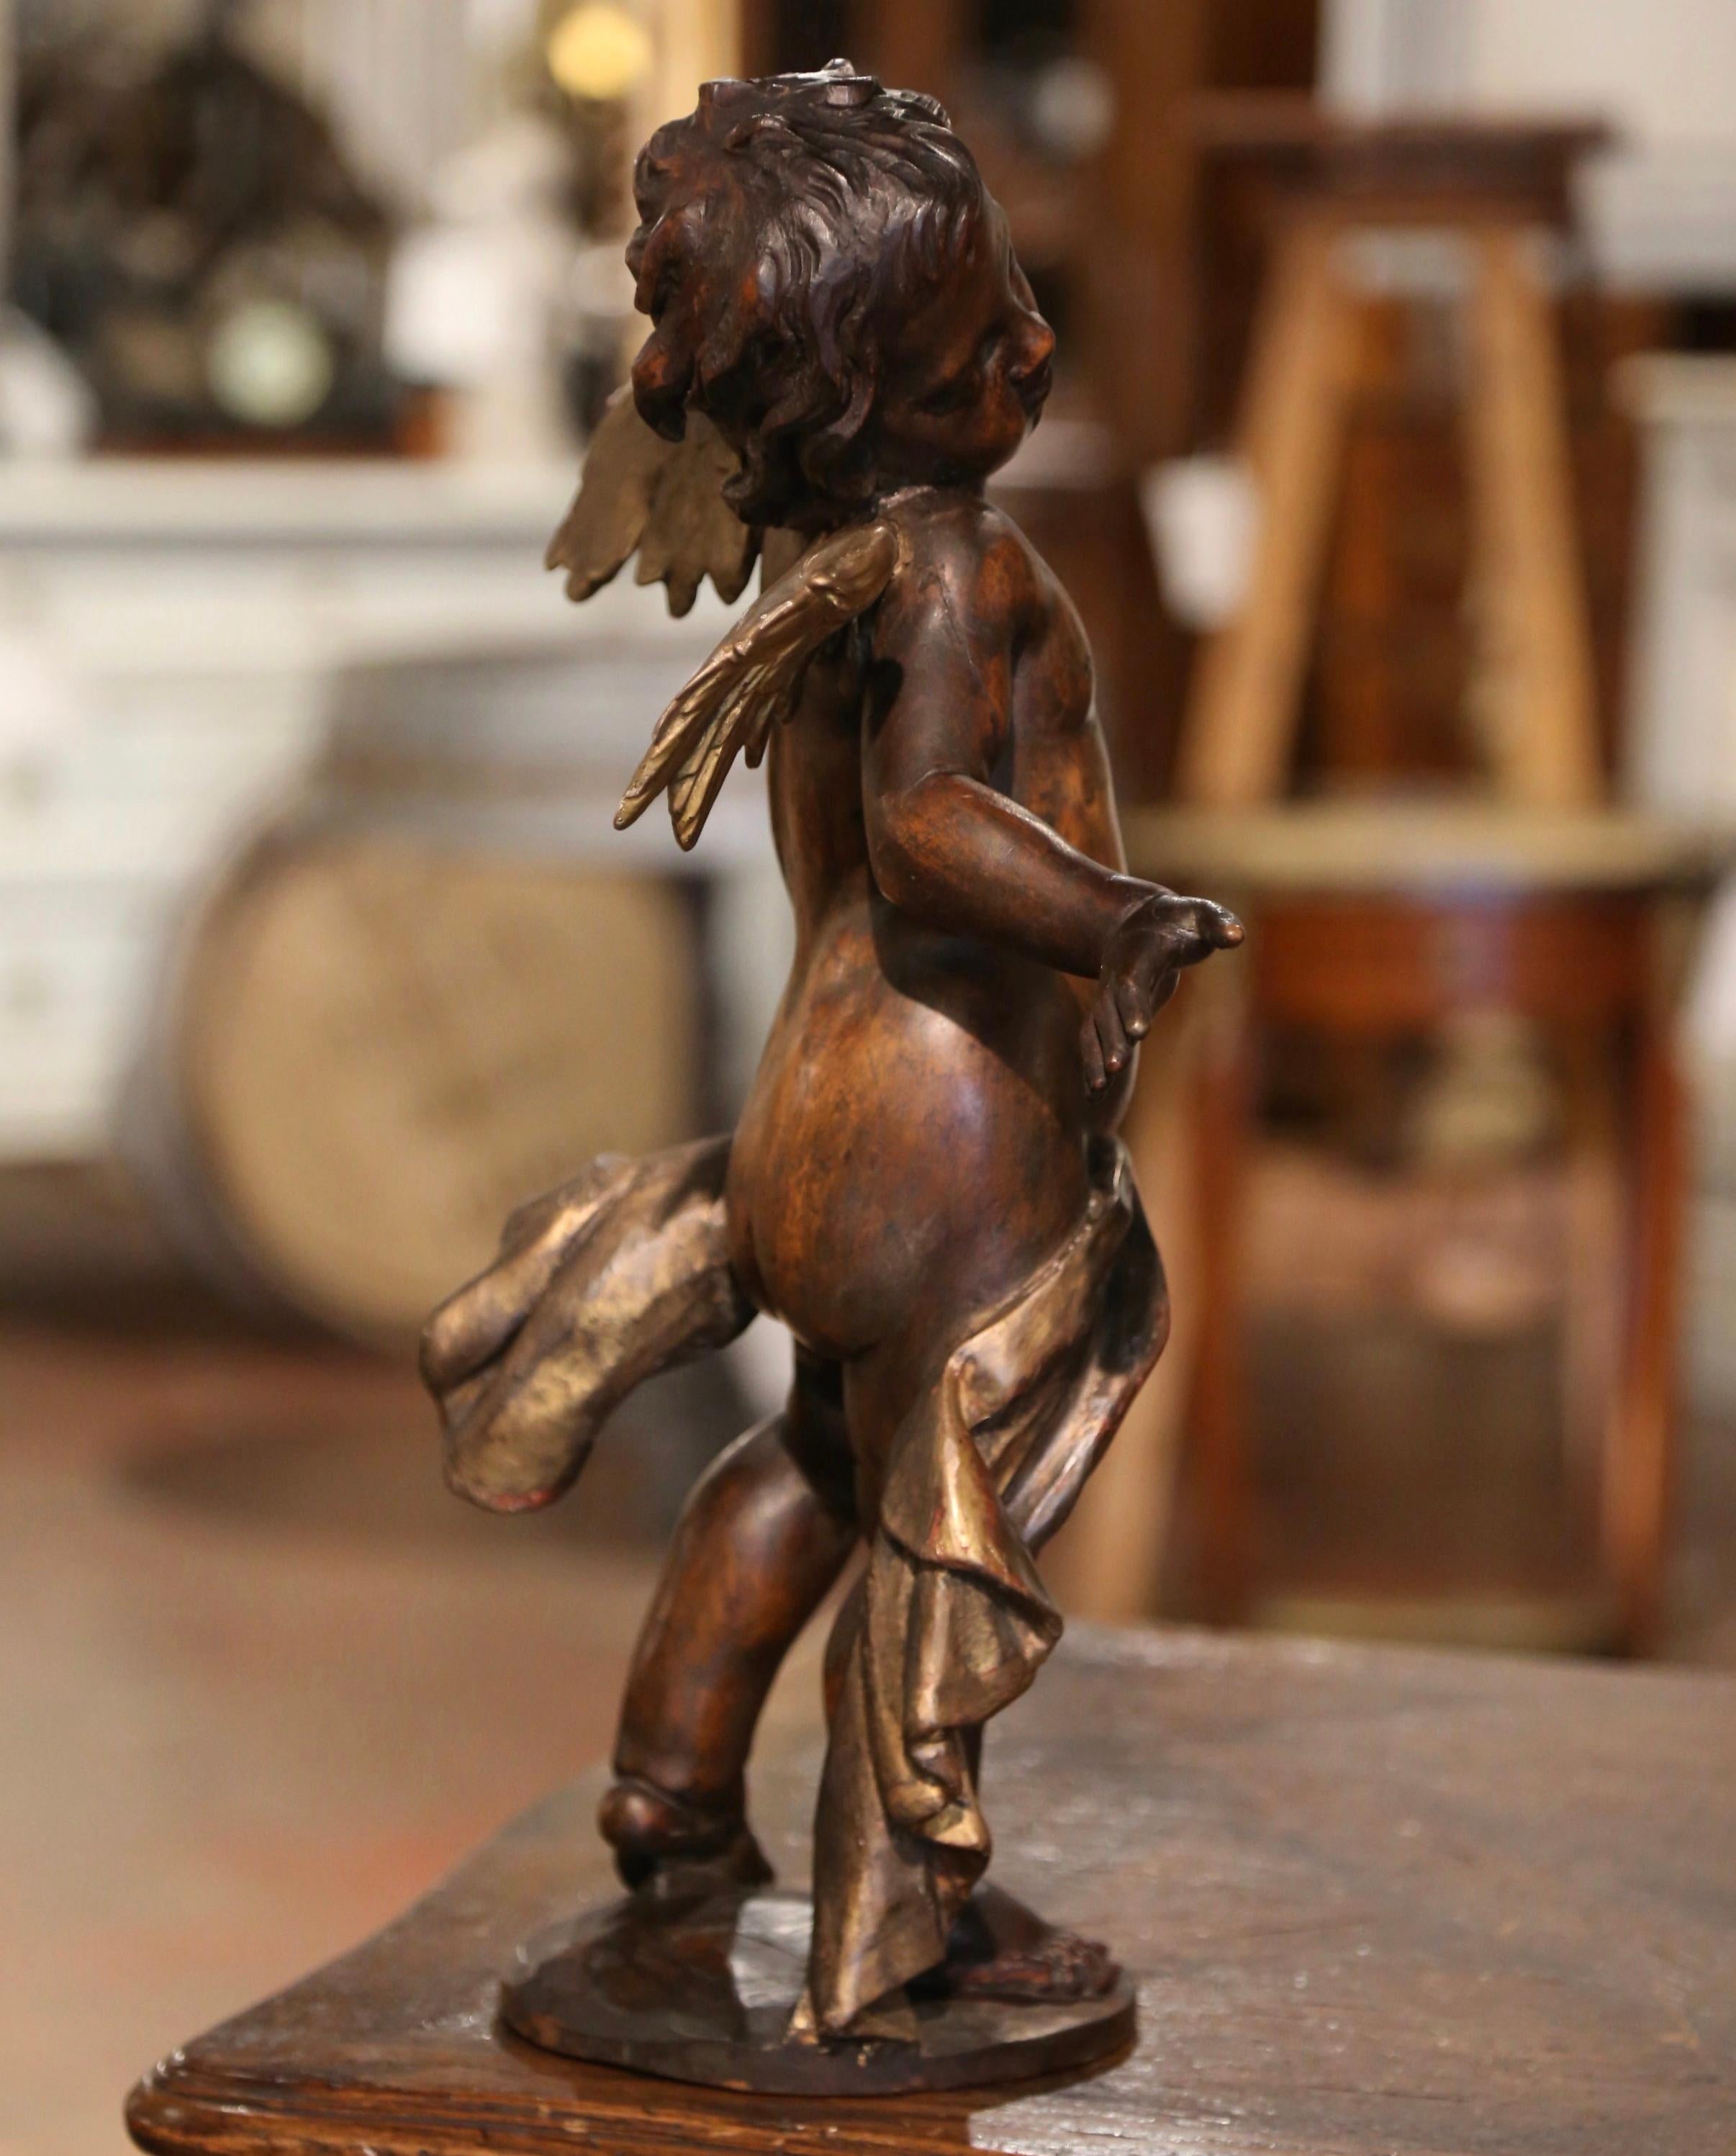 Mid-18th Century Italian Hand Carved Walnut and Gilt Putti Sculpture with Wings For Sale 4